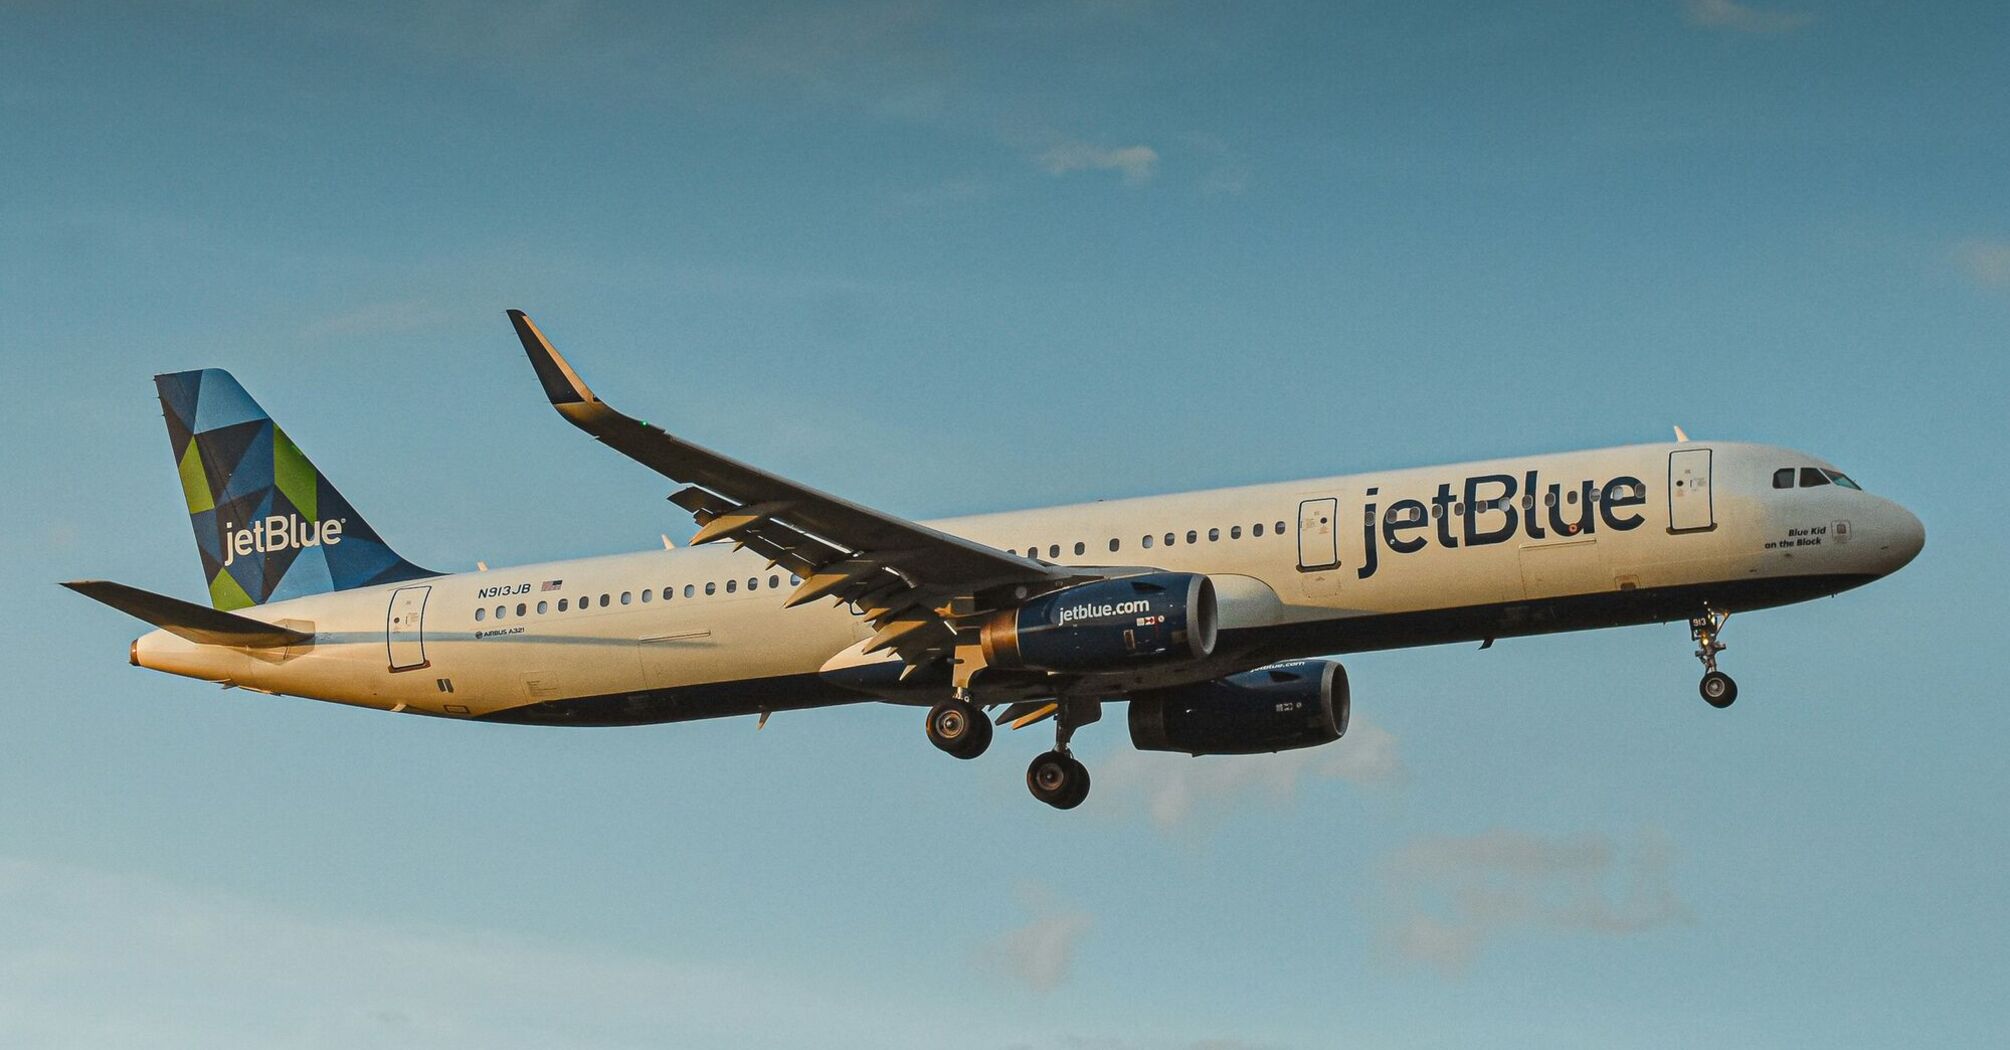 A large JetBlue airplane flying in the sky